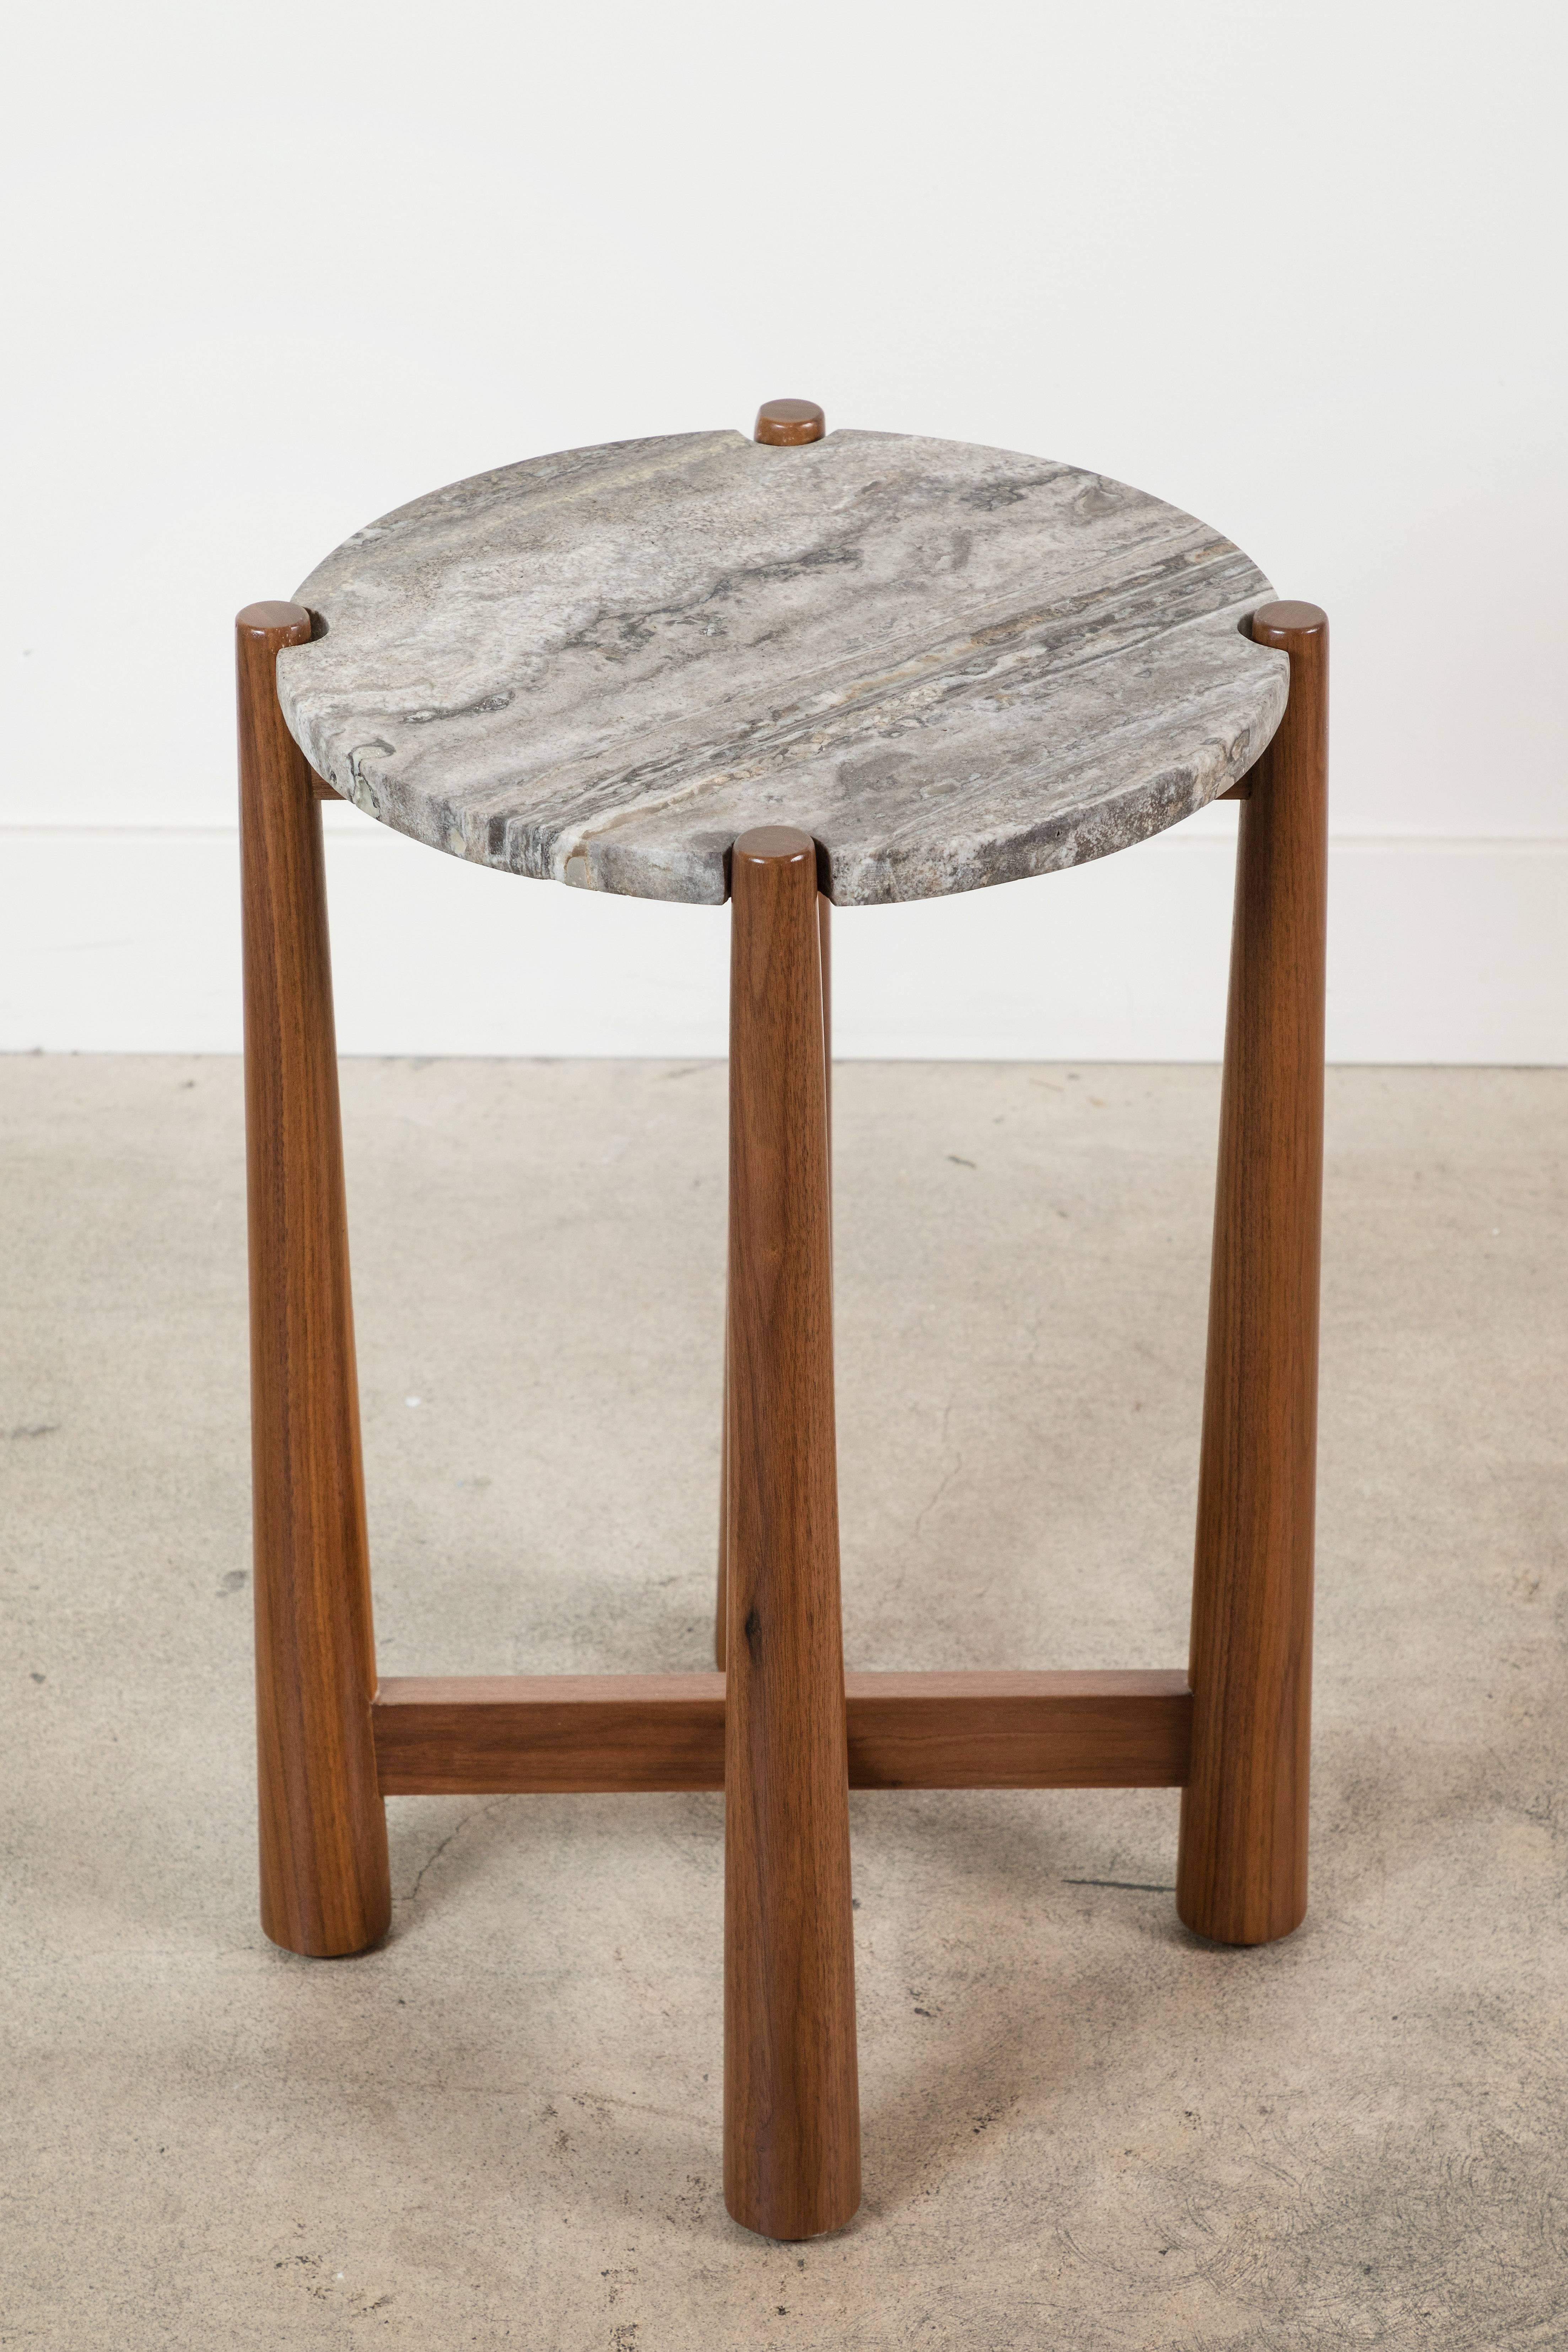 The Bronson Drinks Table features a round stone top with notched corners that rest atop a detailed walnut or oak base. Shown here in Titanium Travertine and Light Walnut.

The Lawson-Fenning Collection is designed and handmade in Los Angeles,